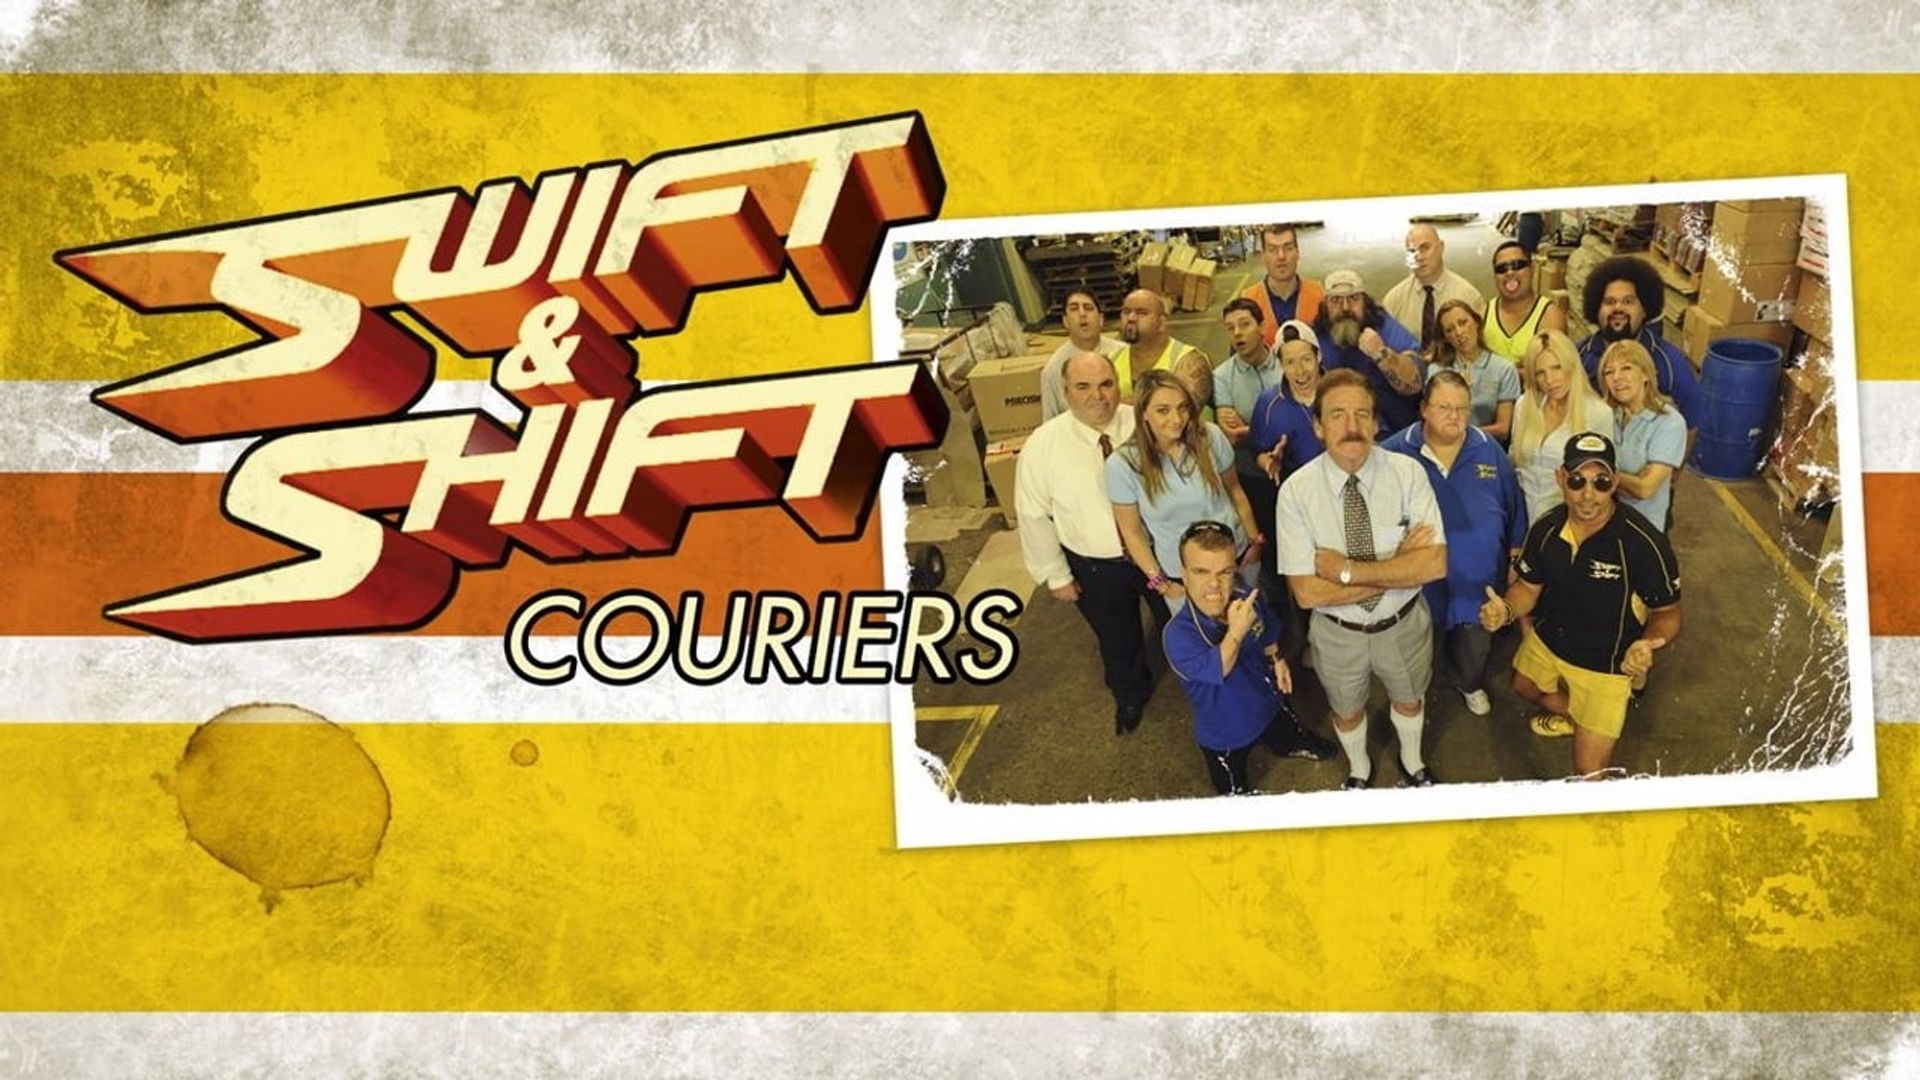 Swift and Shift Couriers background